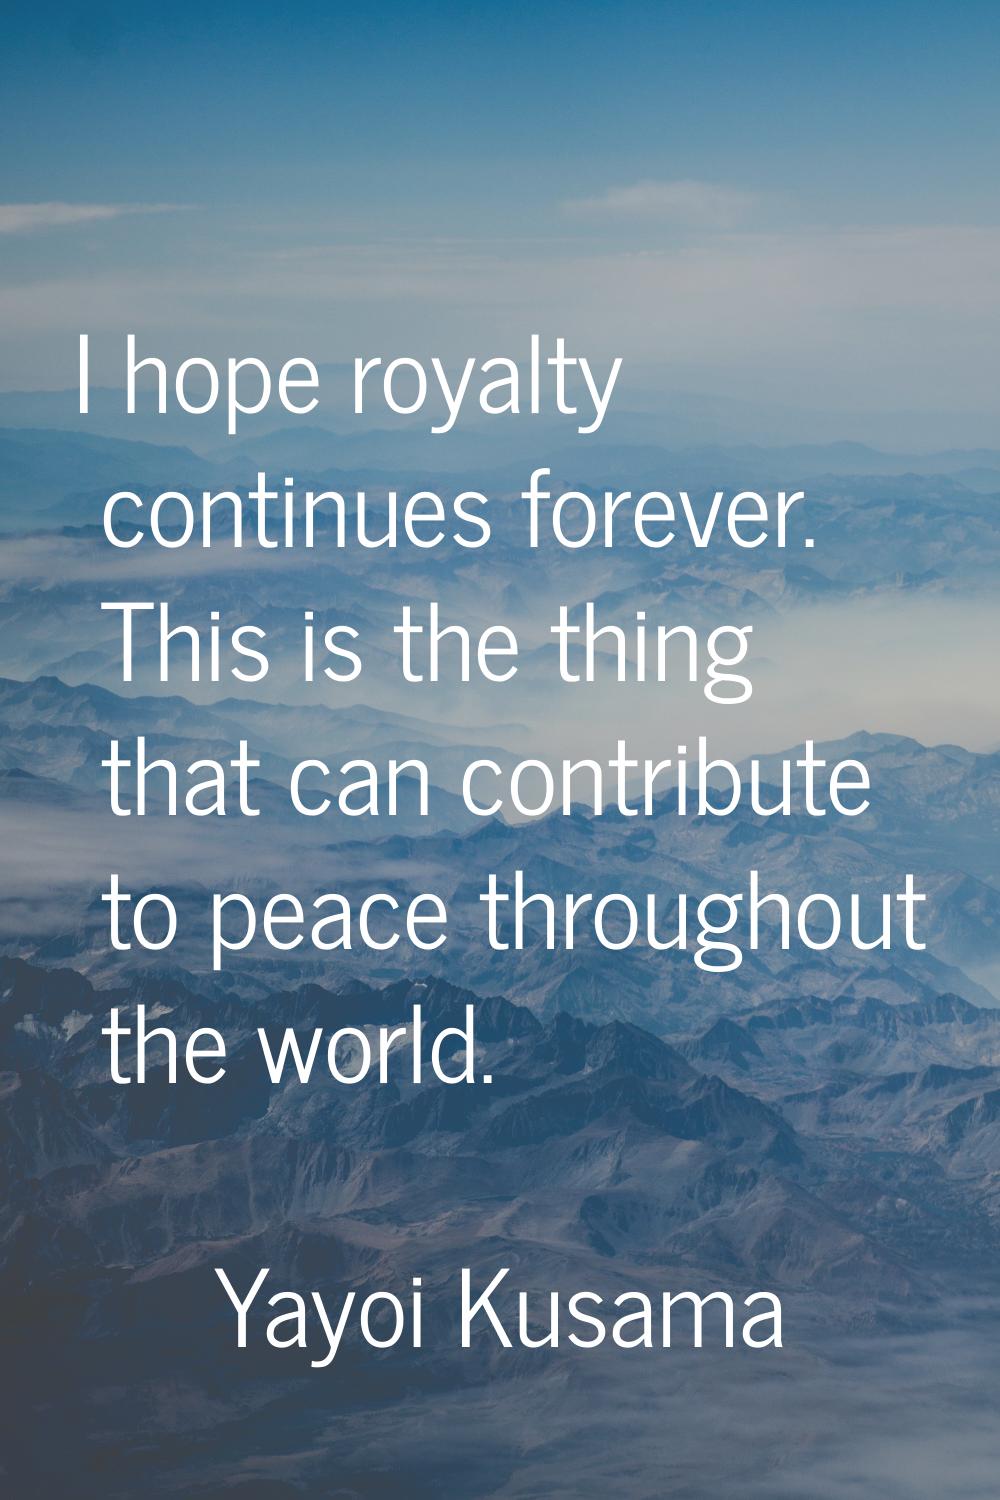 I hope royalty continues forever. This is the thing that can contribute to peace throughout the wor